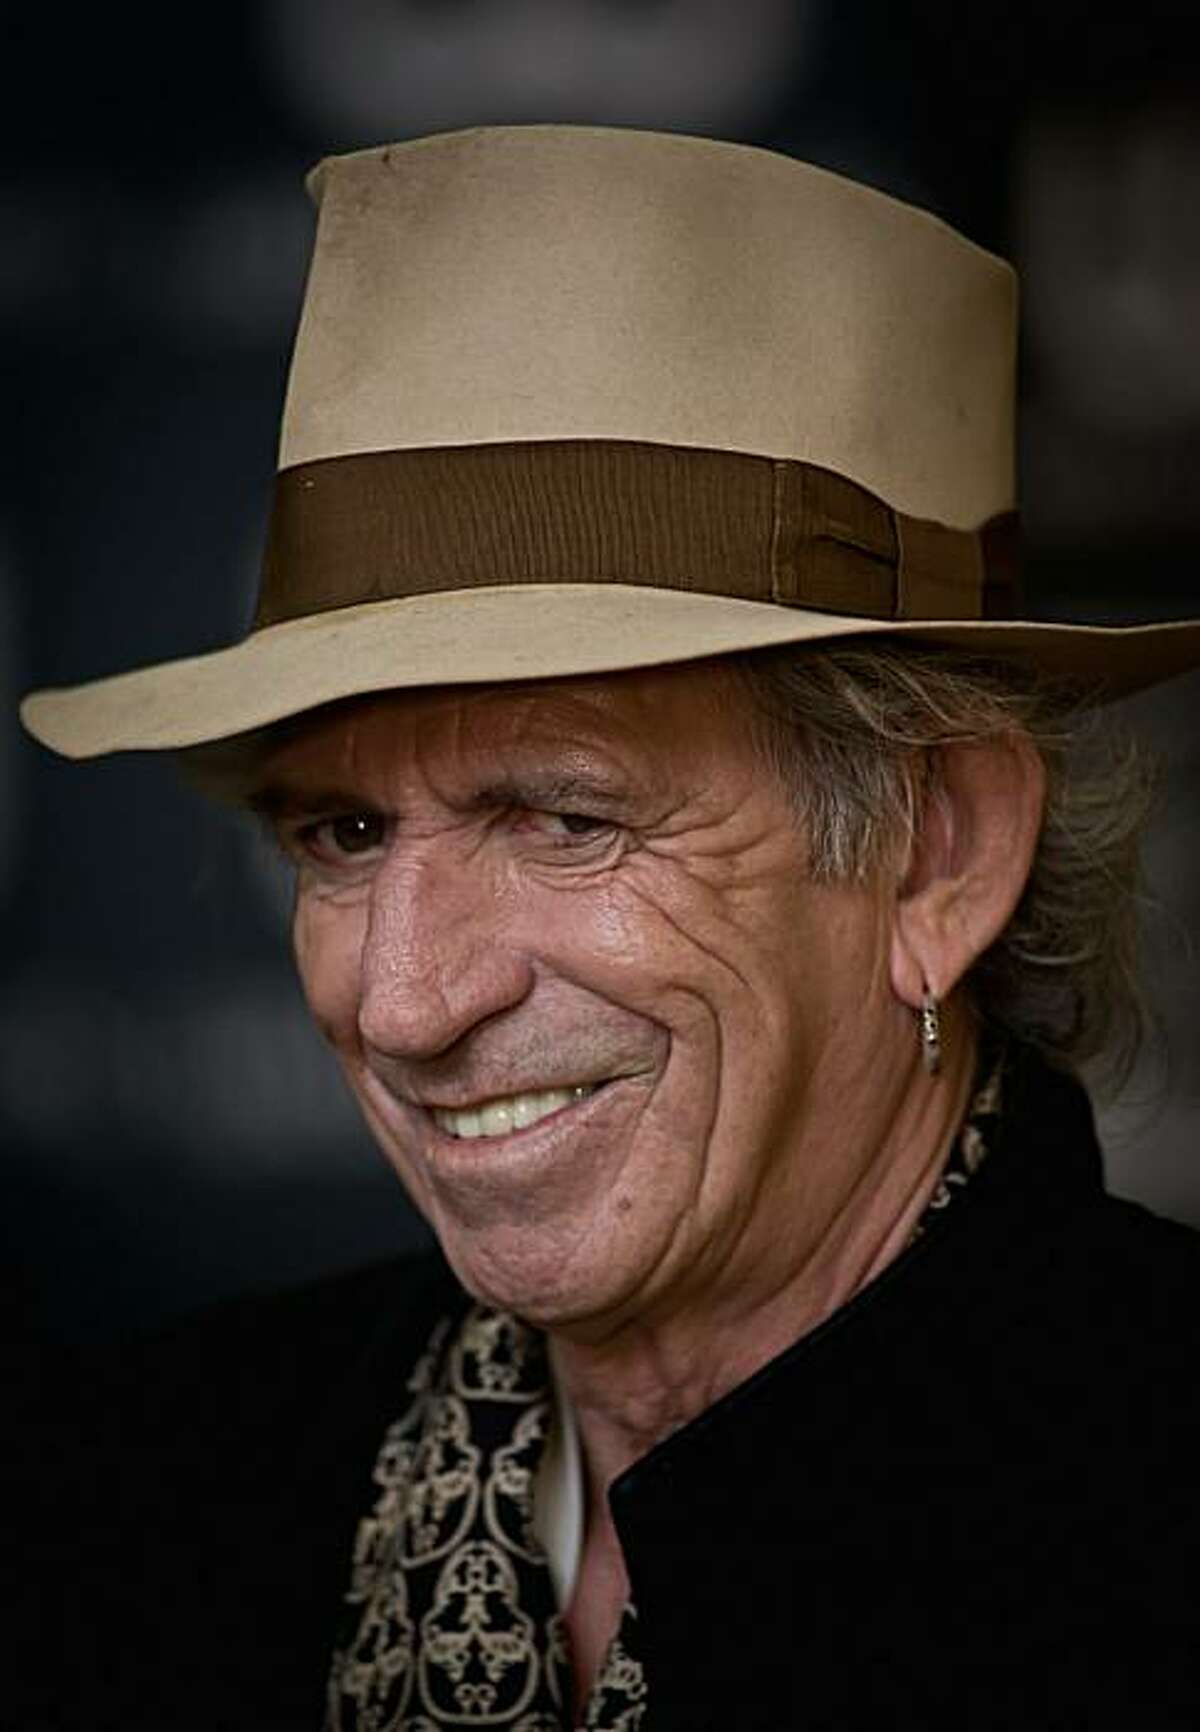 LONDON, ENGLAND - NOVEMBER 03: Keith Richards signs copies of his autobiography 'Life' at Waterstone's Booksellers Piccadilly on November 3, 2010 in London, England.